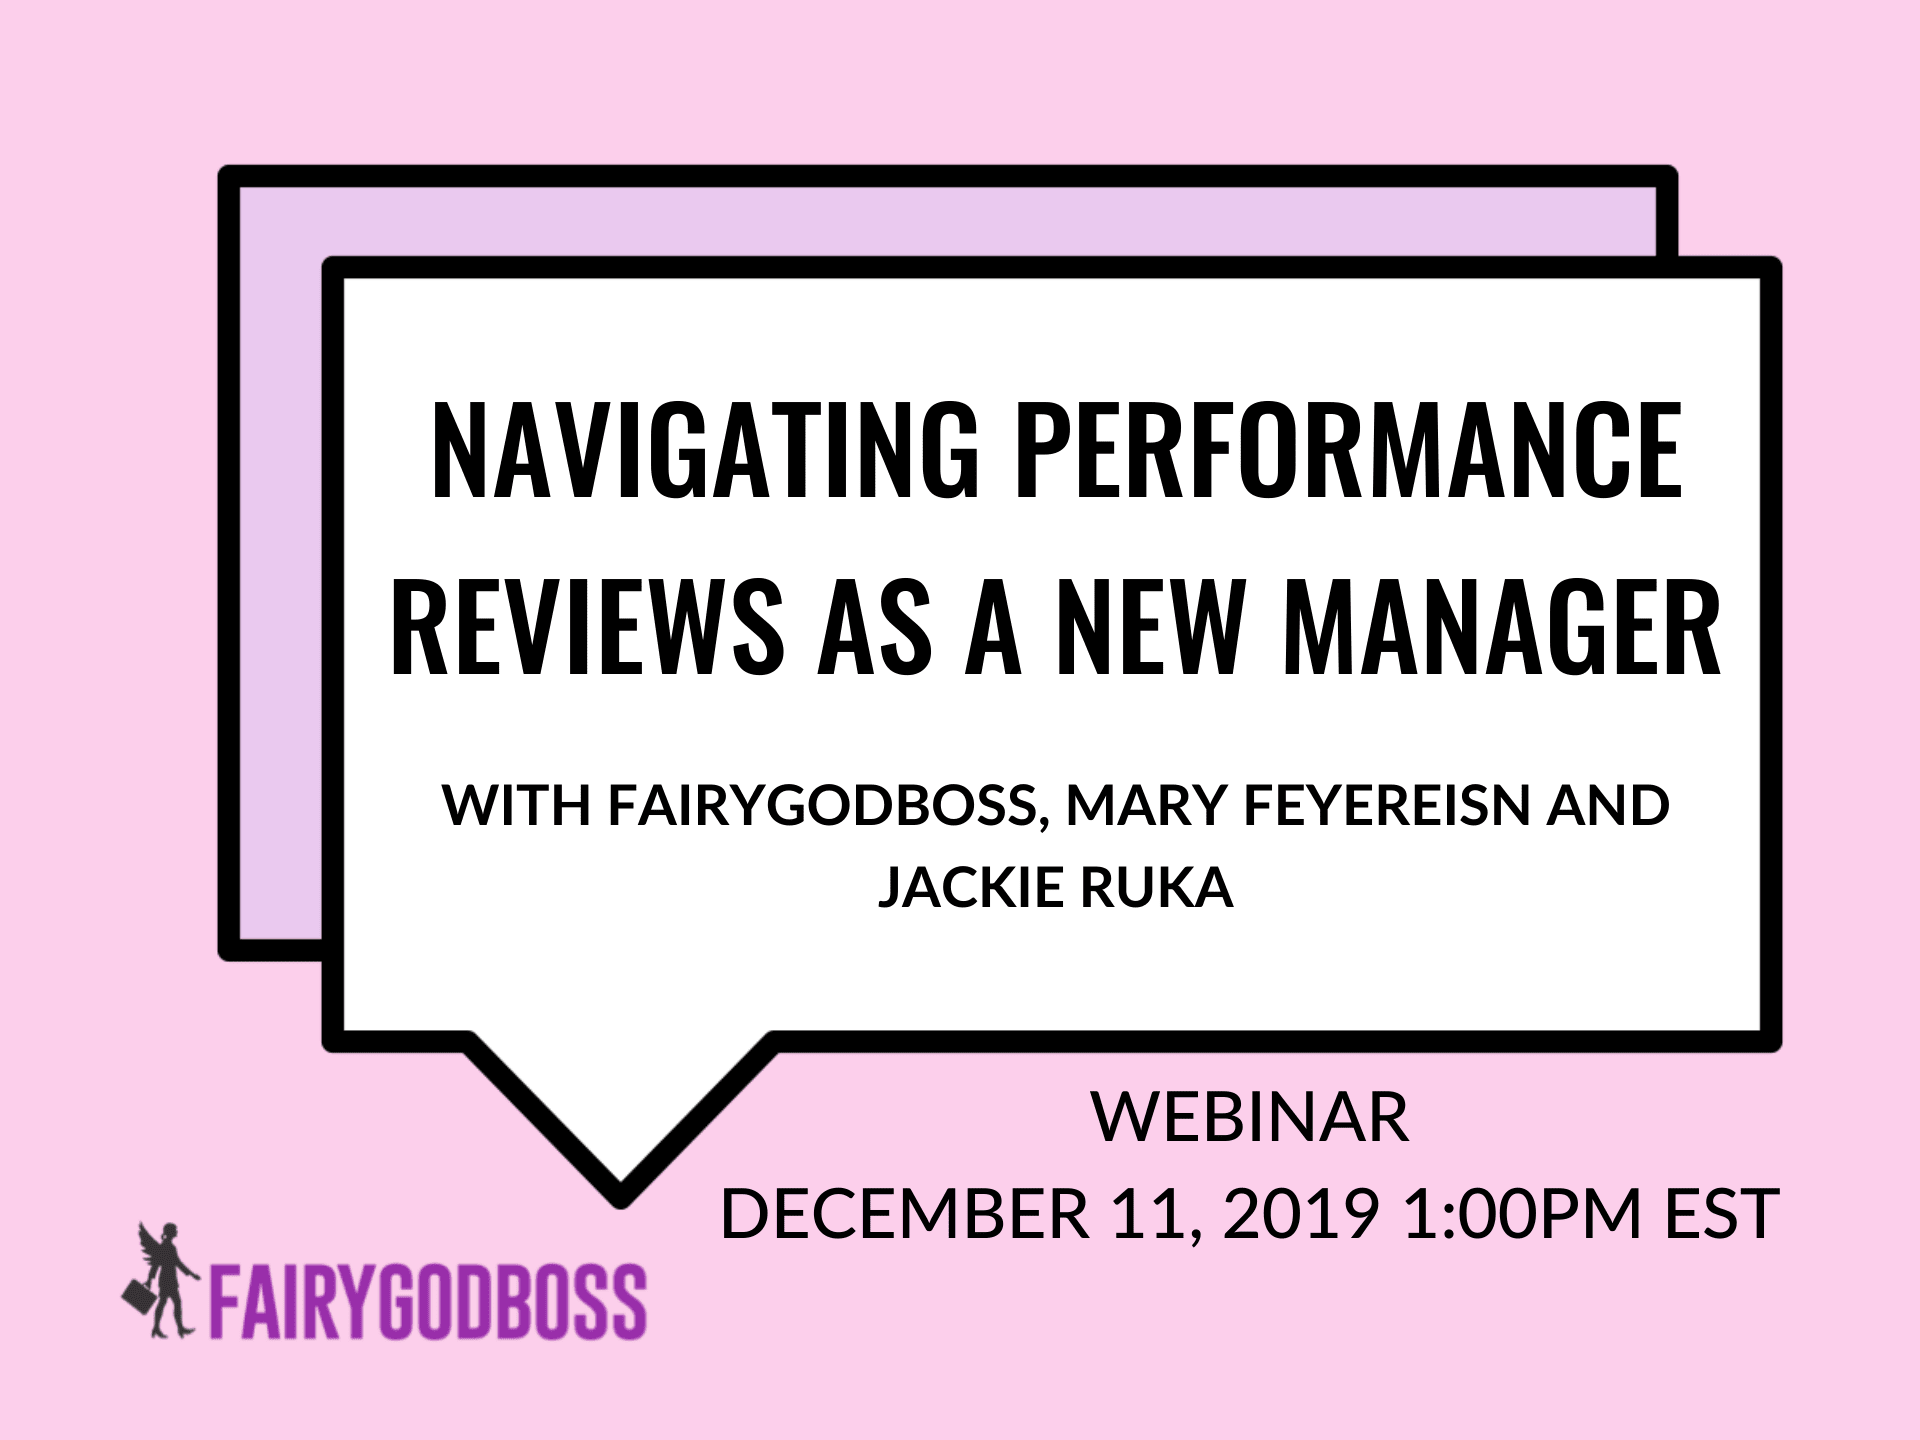 Navigating Performance Reviews as a New Manager